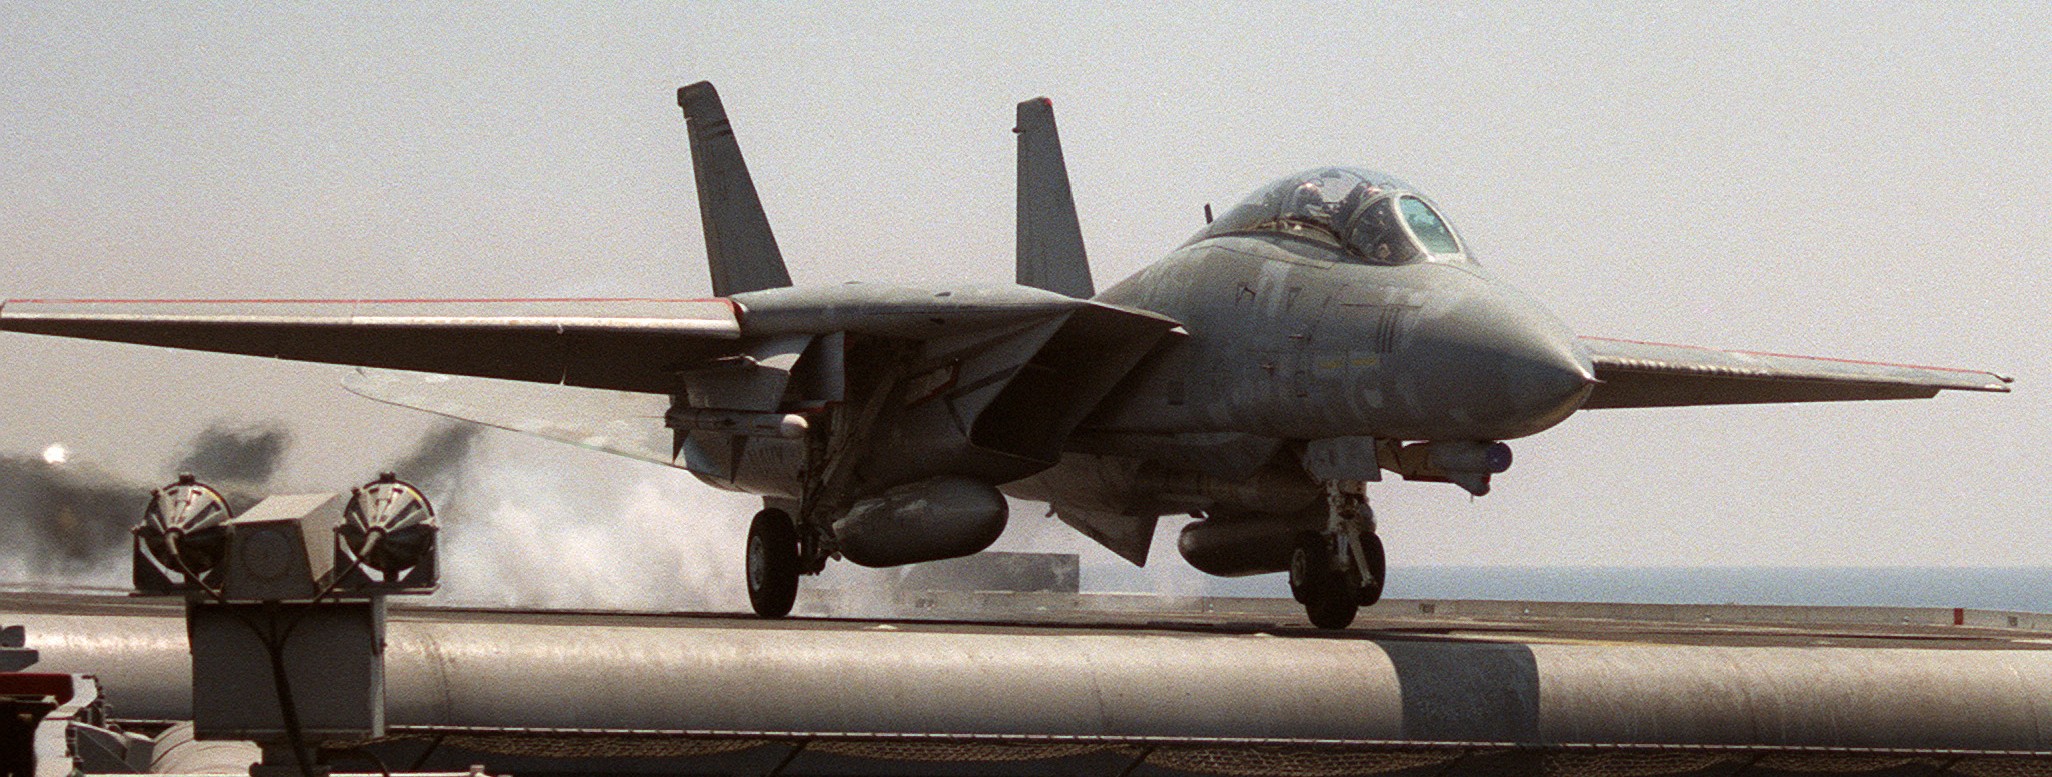 vf-211 fighting checkmates fighter squadron f-14a tomcat us navy carrier air wing cvw-9 uss kitty hawk cv-63 63